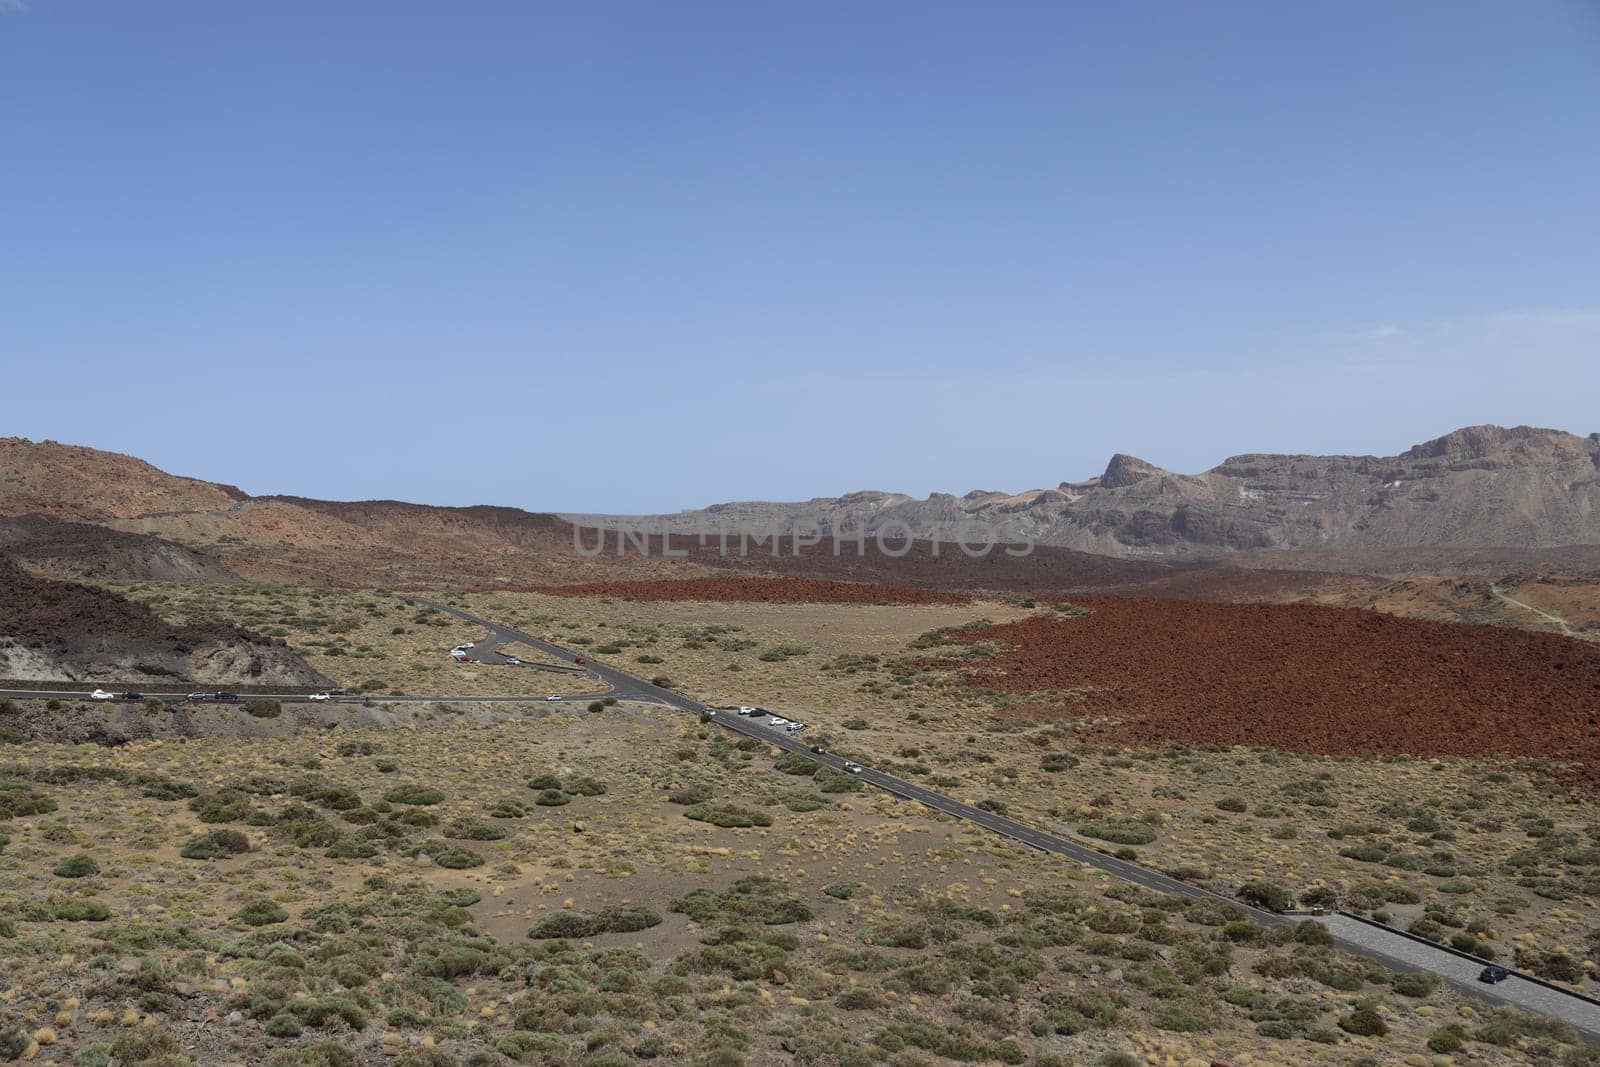 Panoramic view of volcanic lanscape in front of the ocean from the peak of mountain Teide, Tenerife, Canary islands, Spain